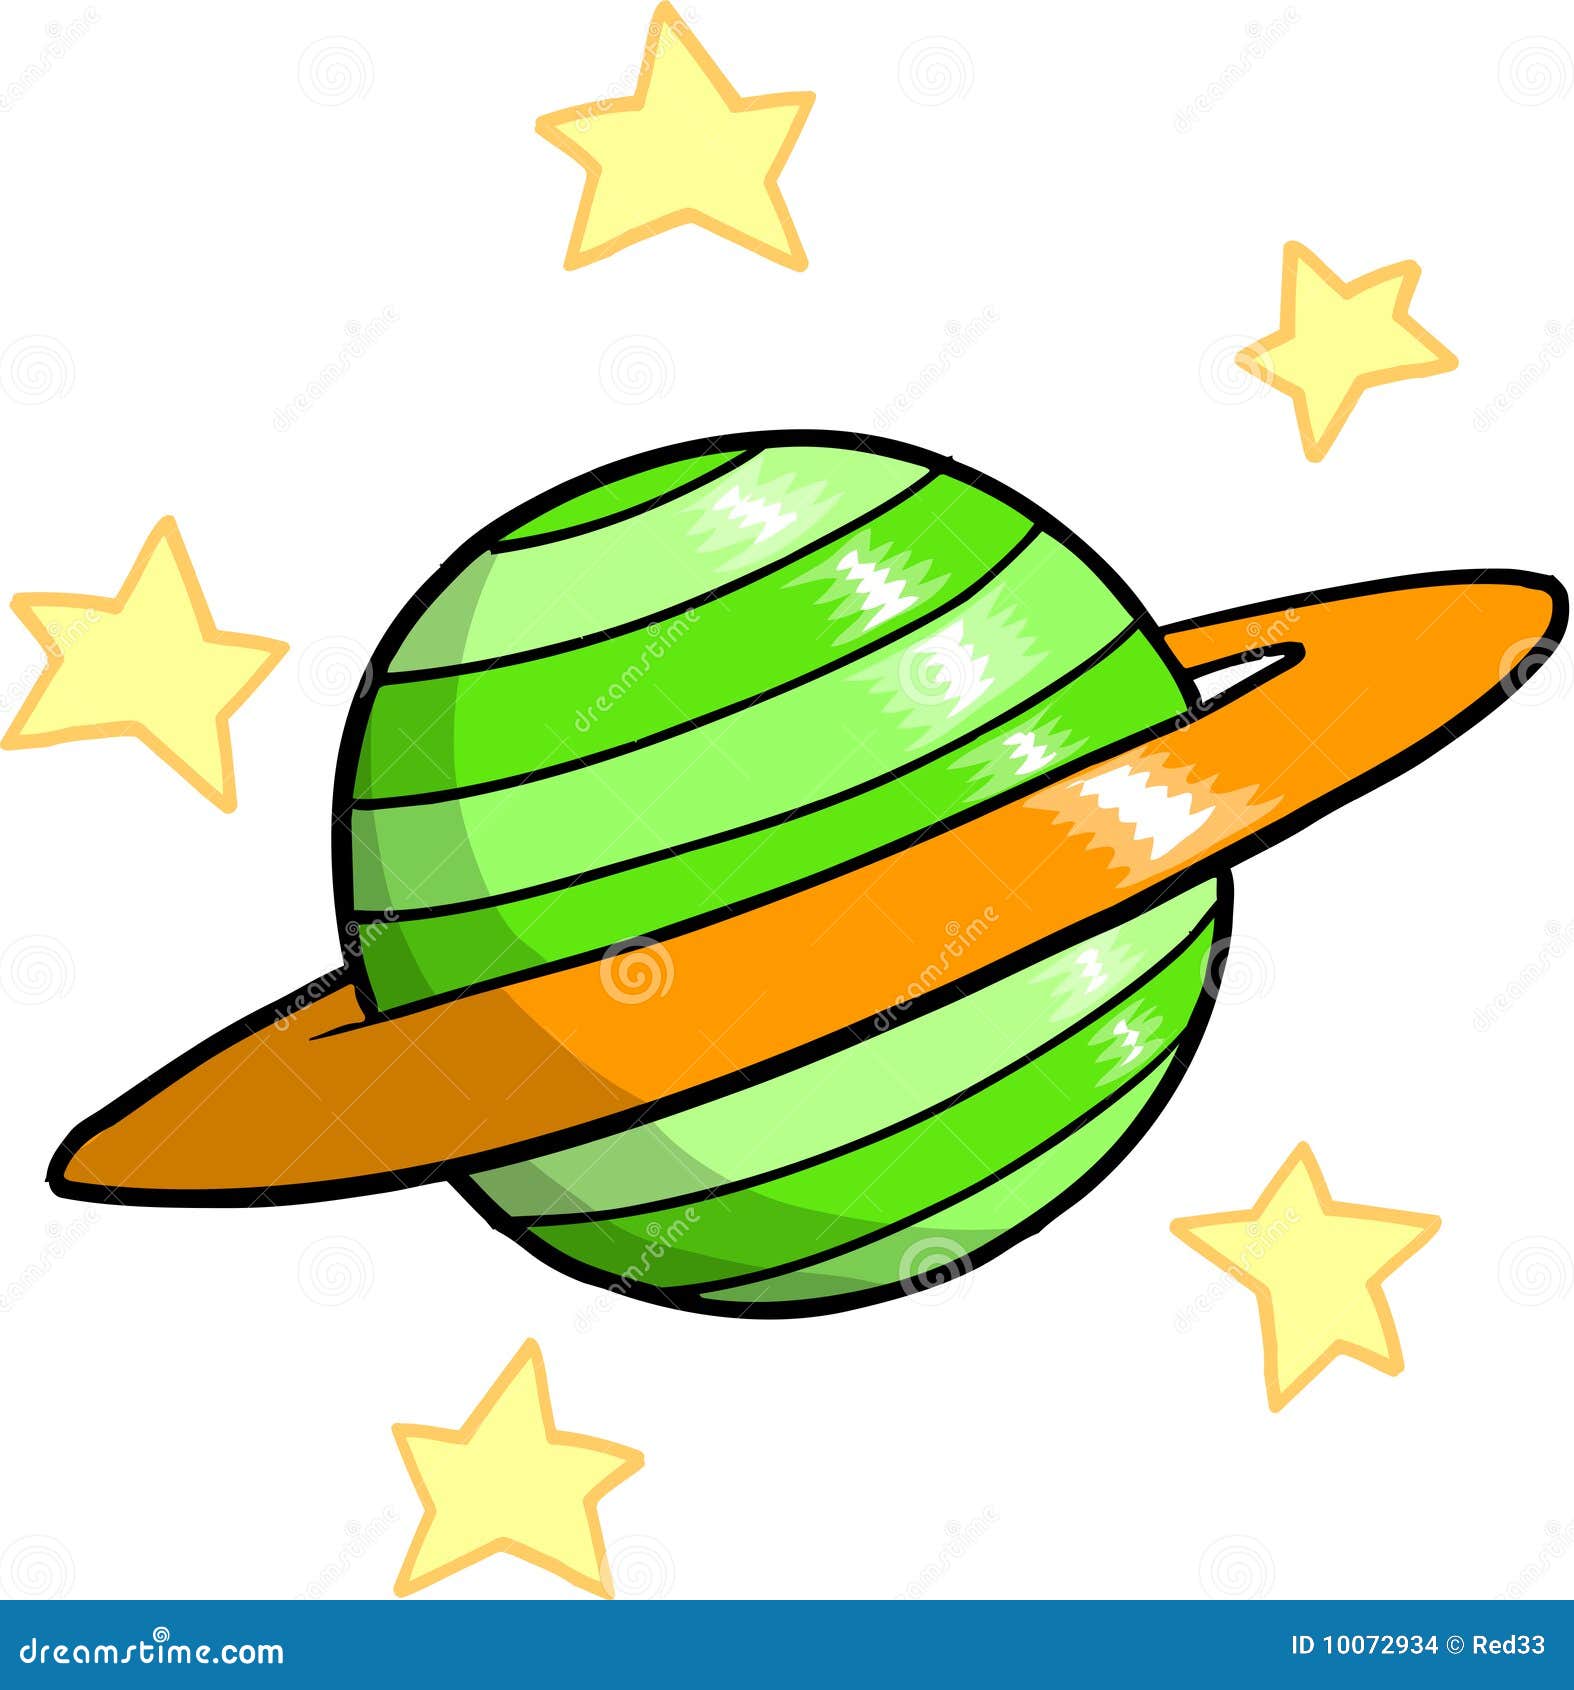 planet cdr clipart - photo #18